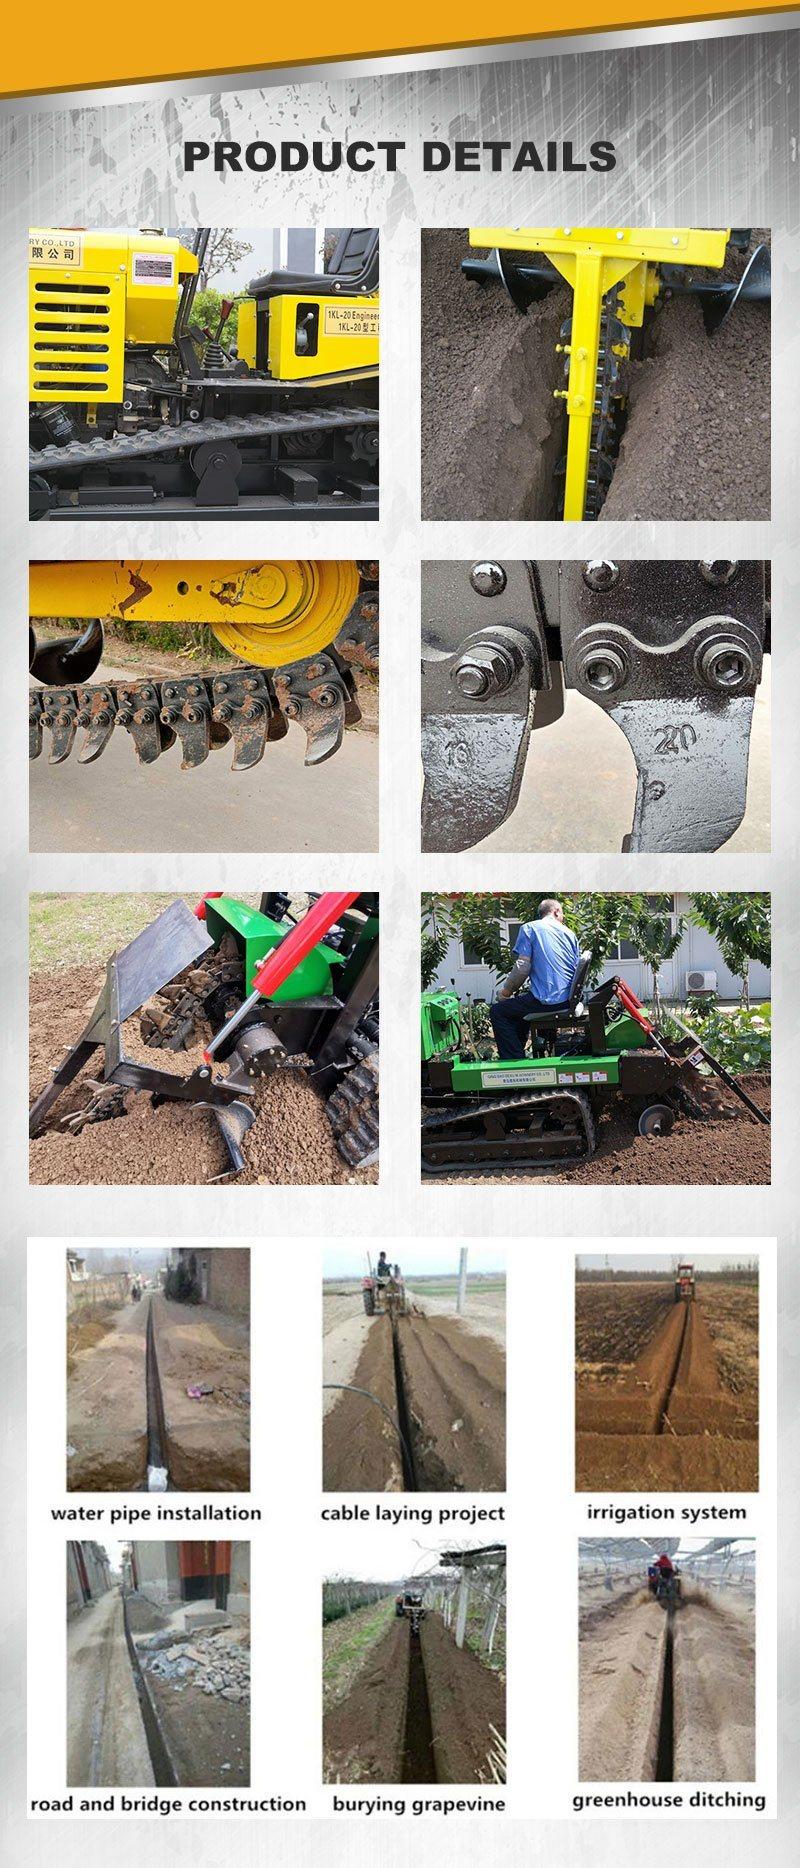 OEM Farm Tractor Mounted Chain Trencher Diesel Equipment for Sale